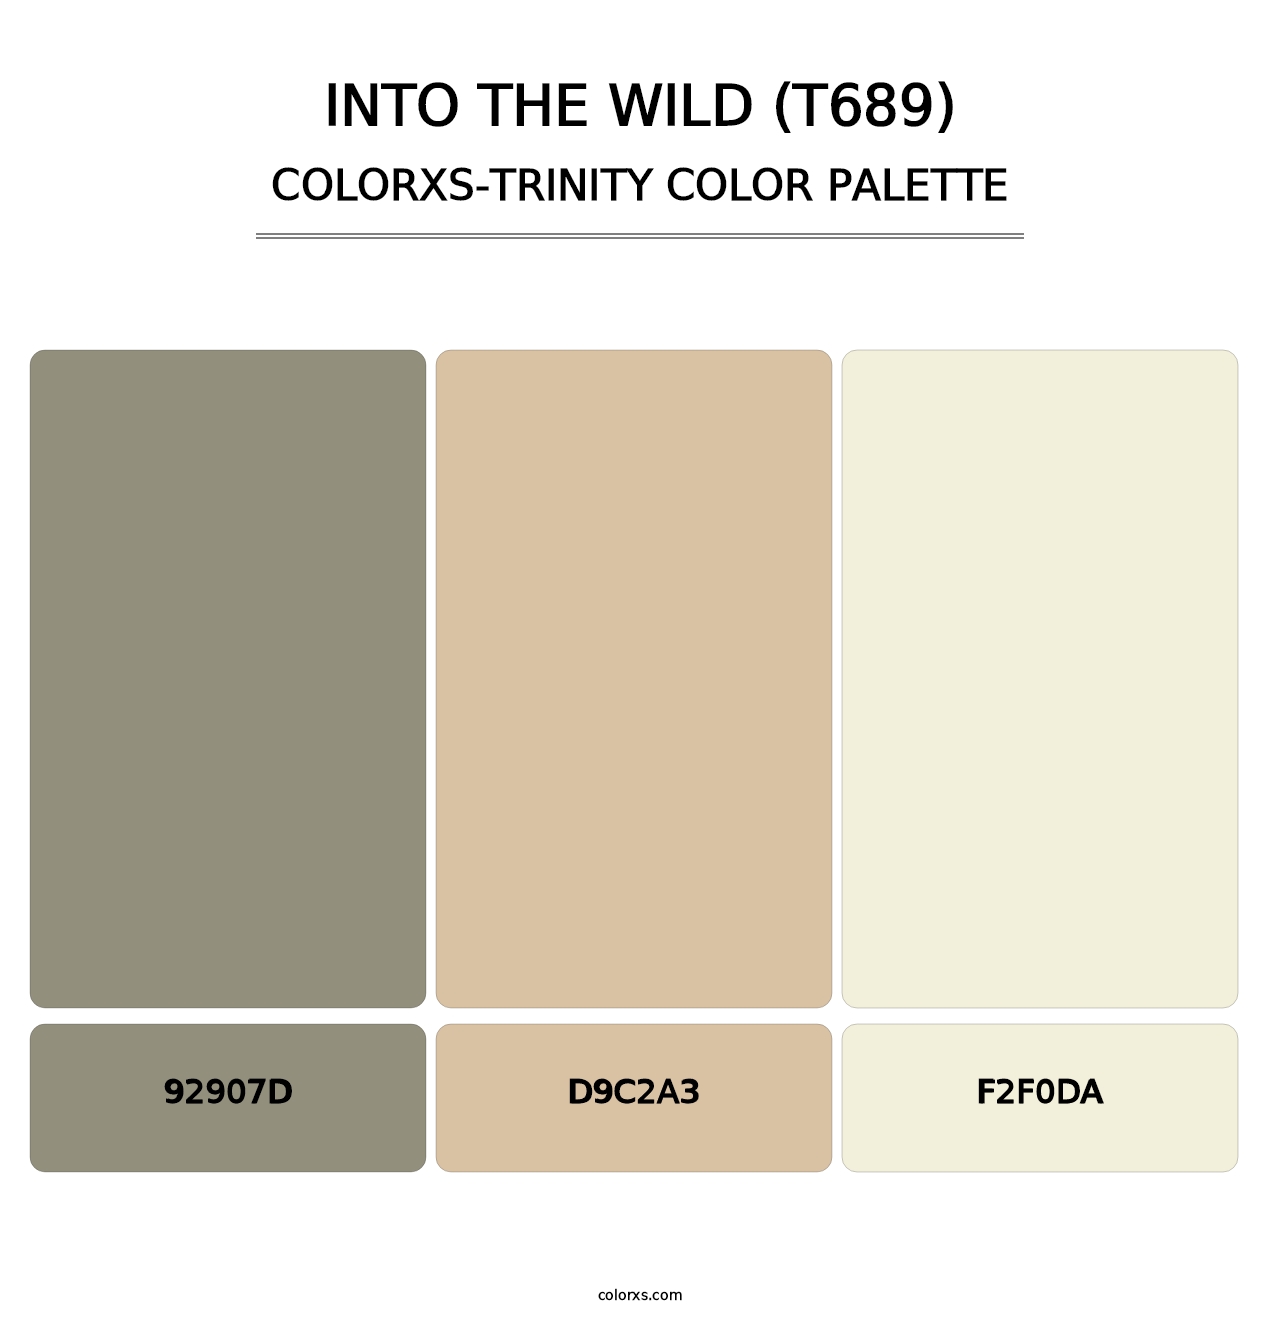 Into the Wild (T689) - Colorxs Trinity Palette